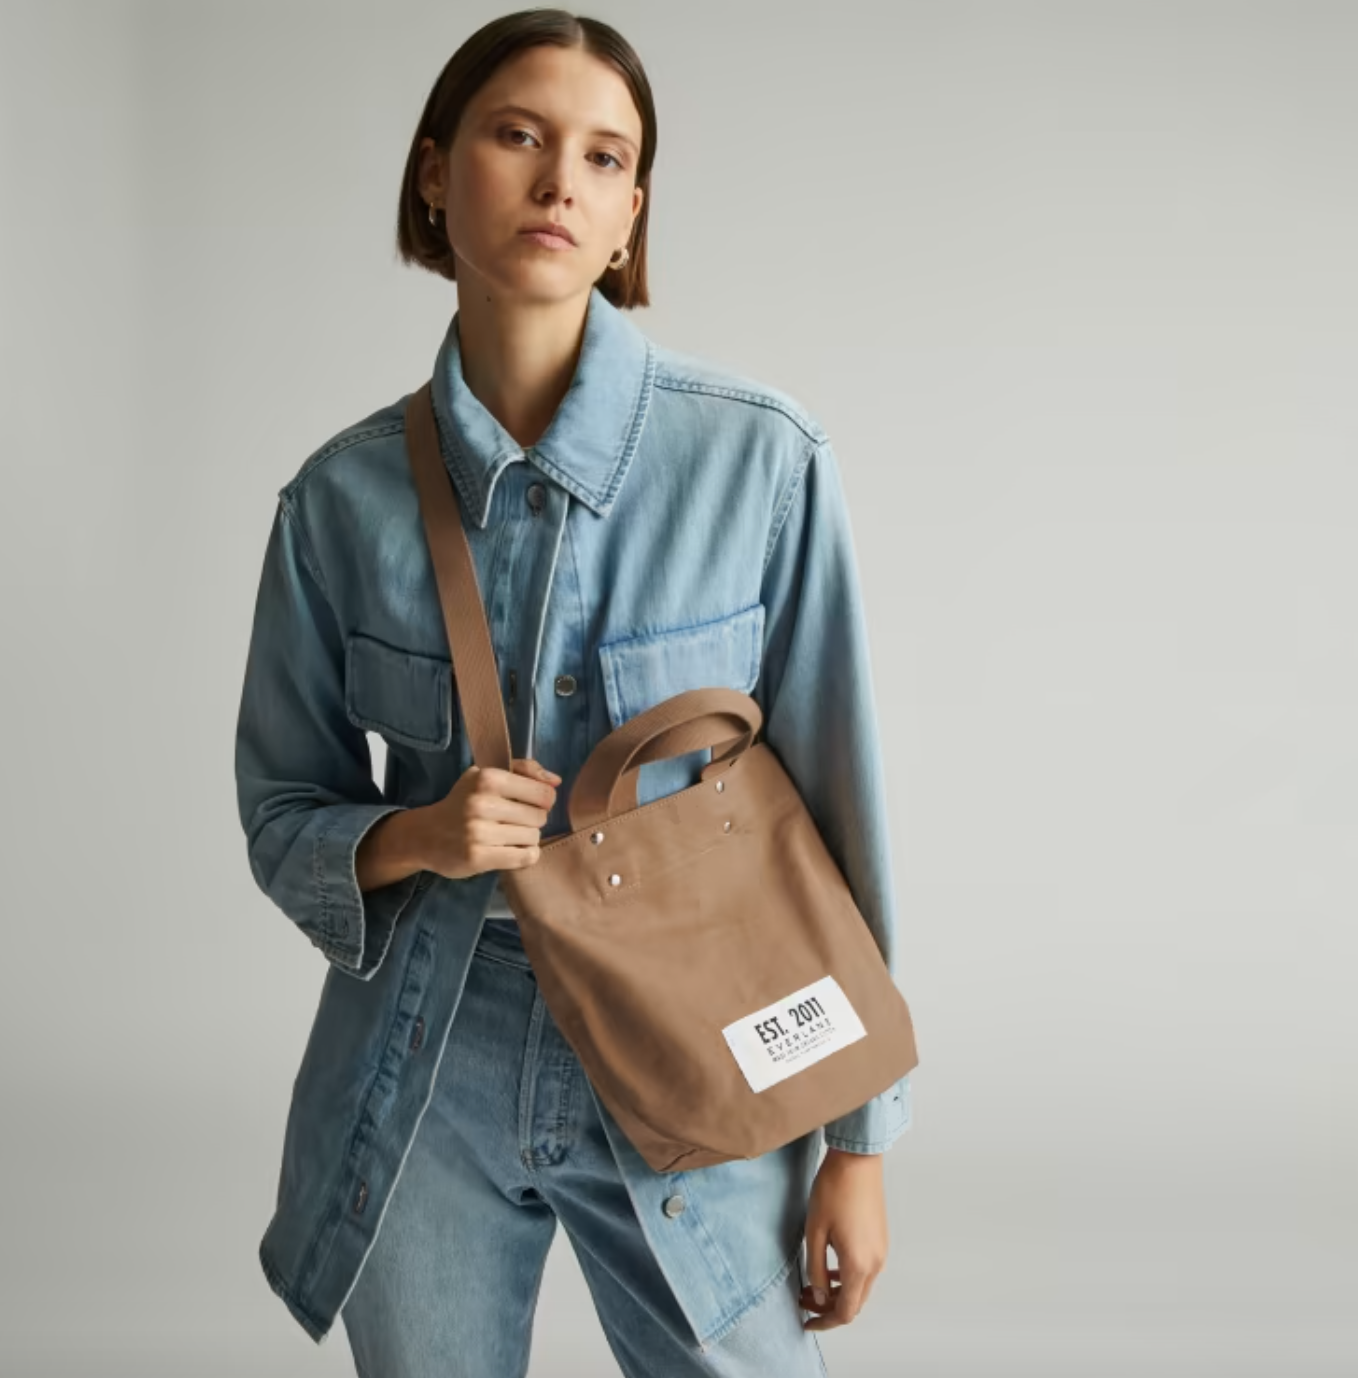 Best Summer Bags 2021 - Affordable by Amanda